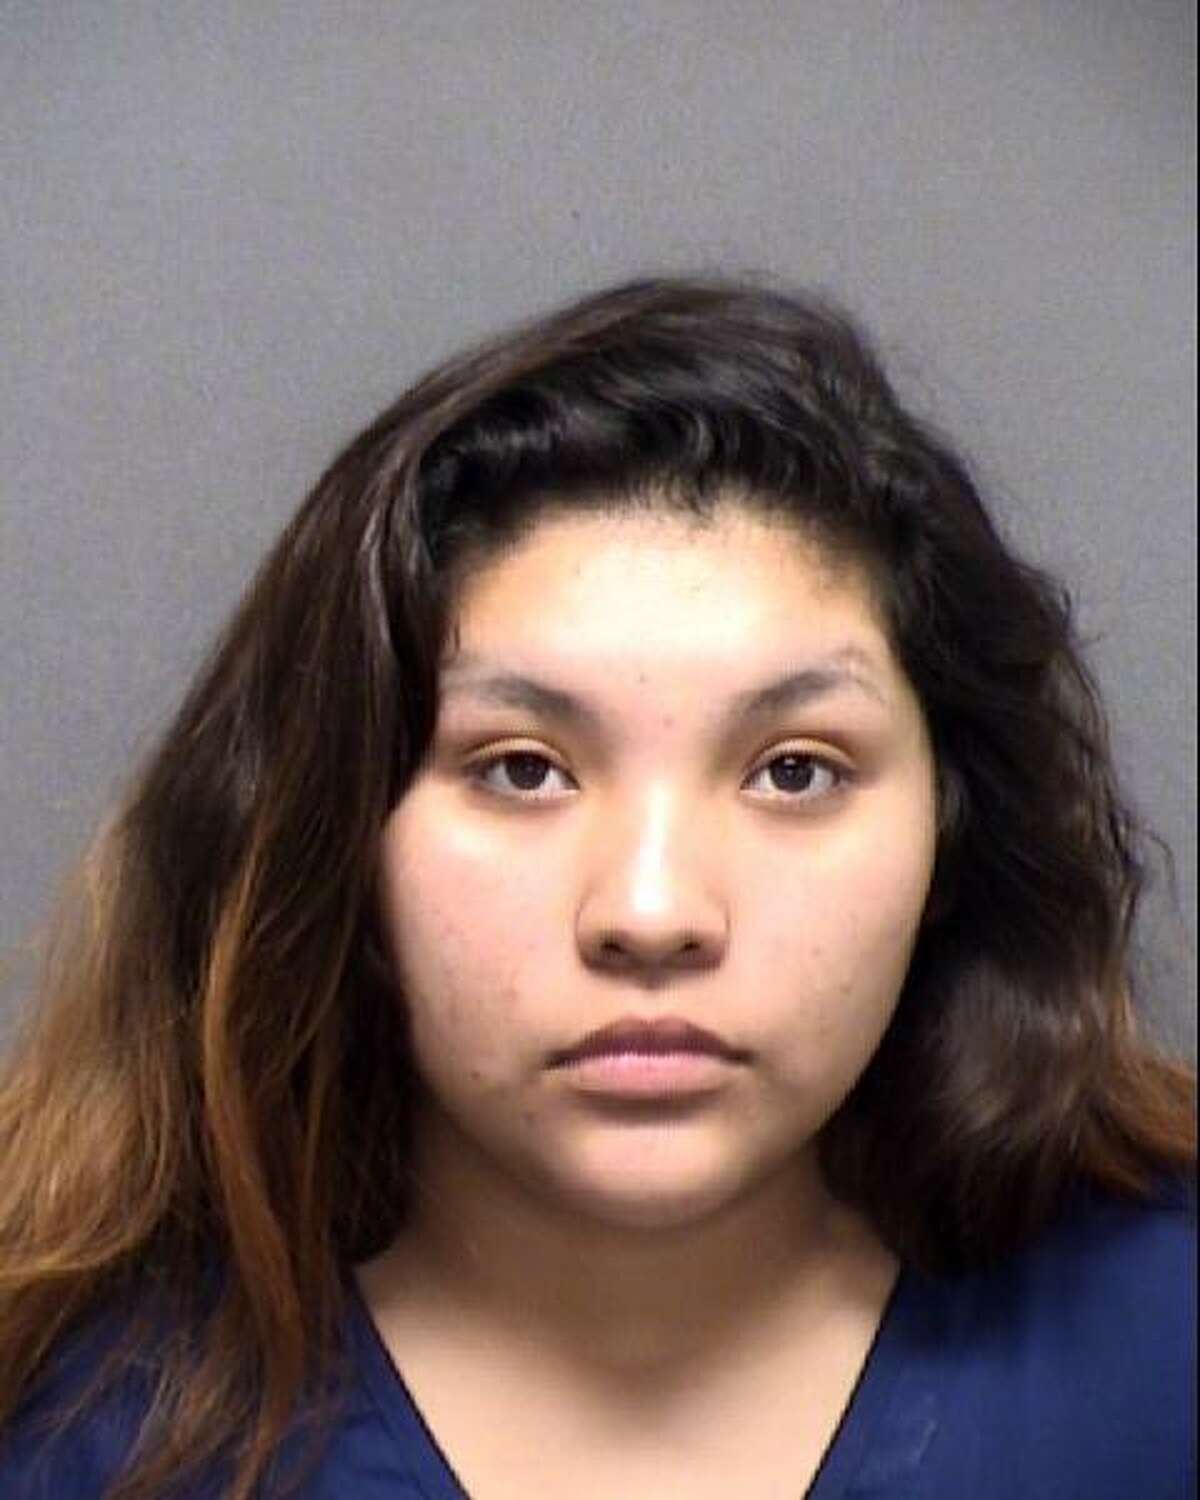 Rosalinda Liliana Castaneda, 20, was arrested Jan. 20, 2020 and charged with aggravated assault with a deadly weapon and assault of family choking or strangulation. Castaneda allegedly choked her boyfriend and attacked him with knife after he sneezed on her, according to court records.